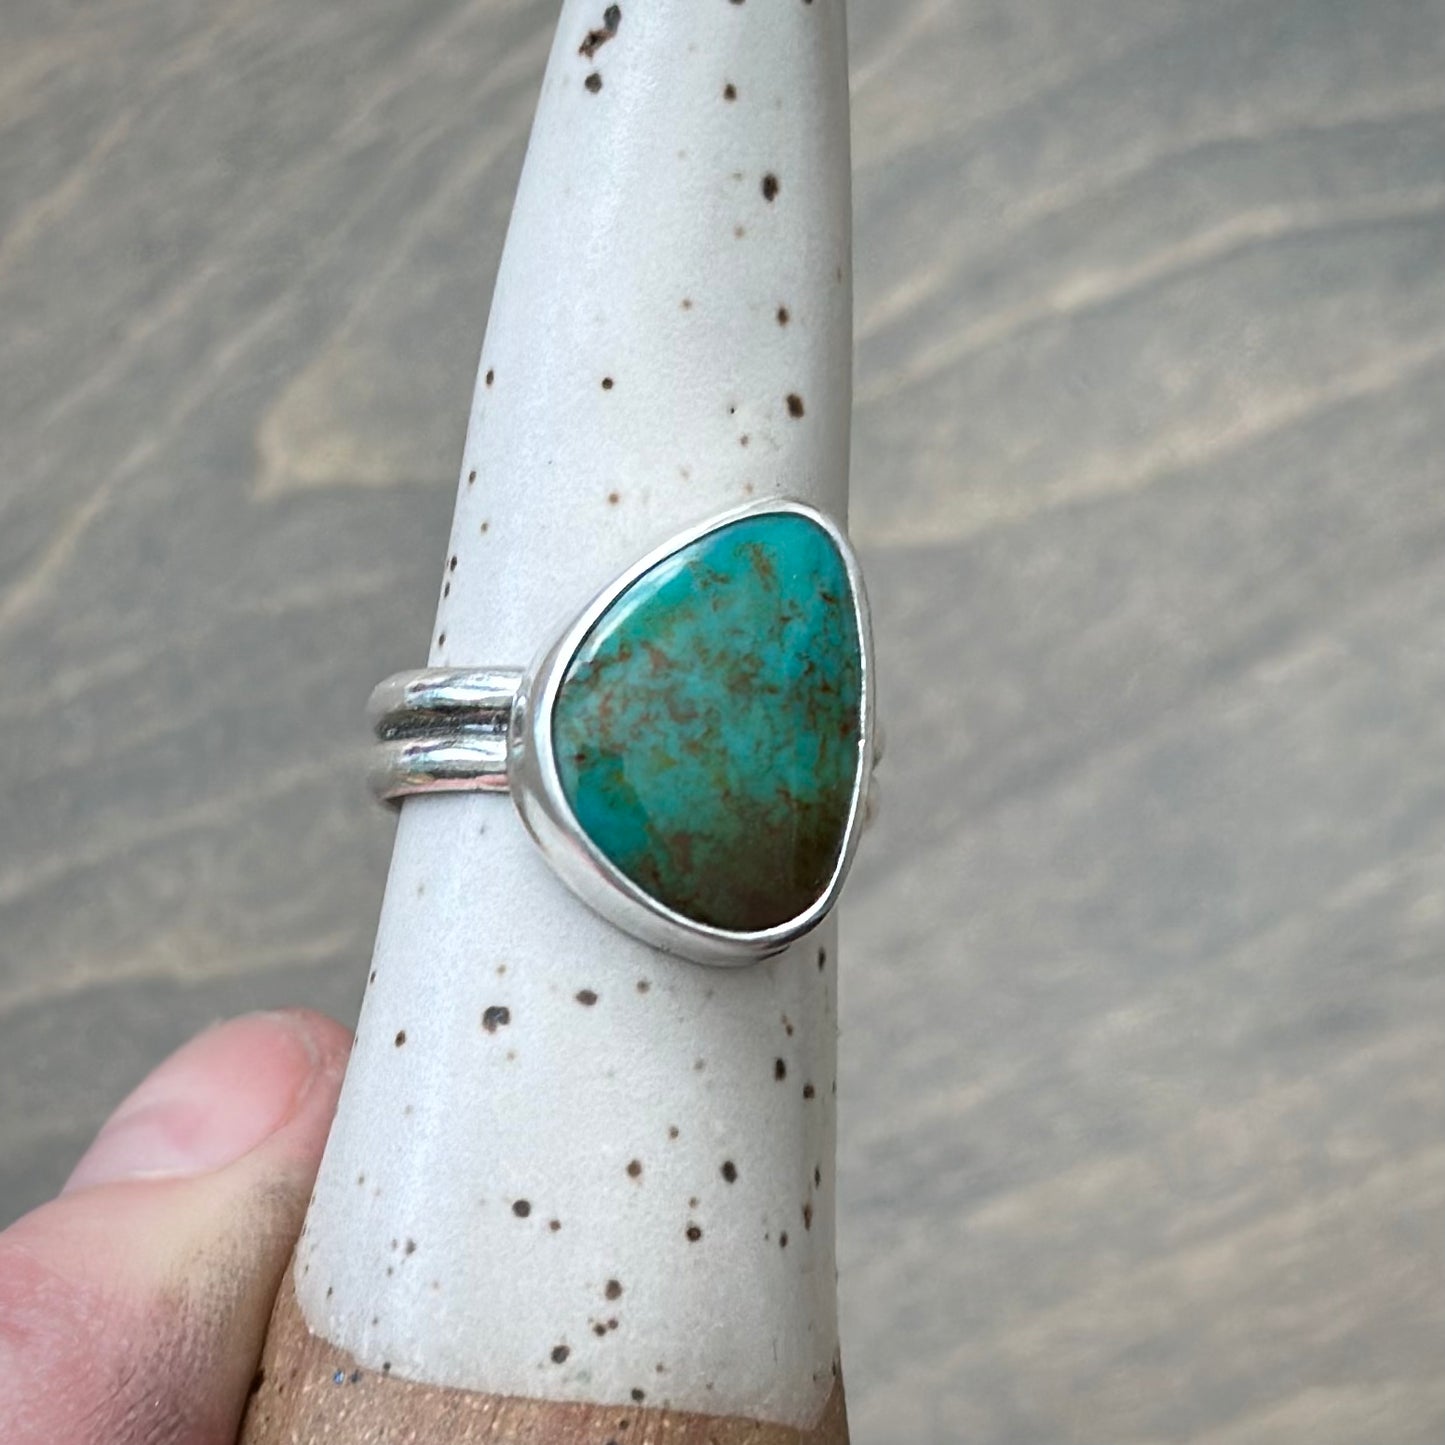 Evans Turquoise Ring in size 8-3/4